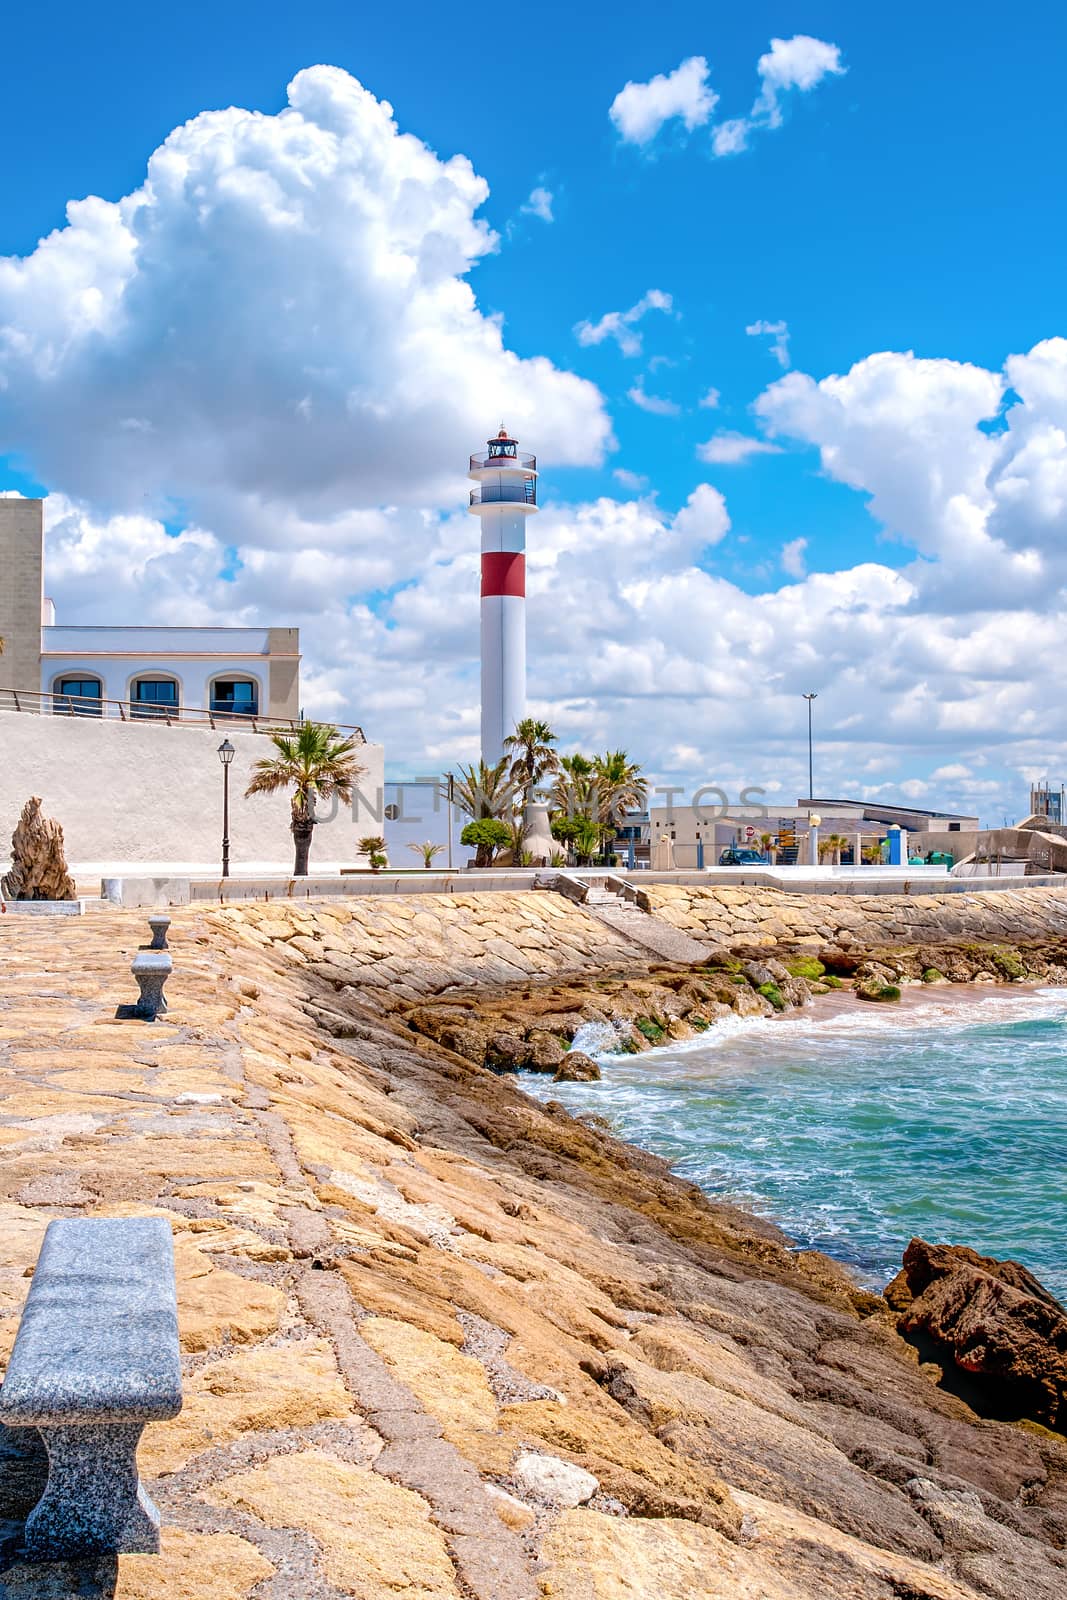 The town of Rota is a Spanish municipality located in the Province of Cádiz, Andalusia